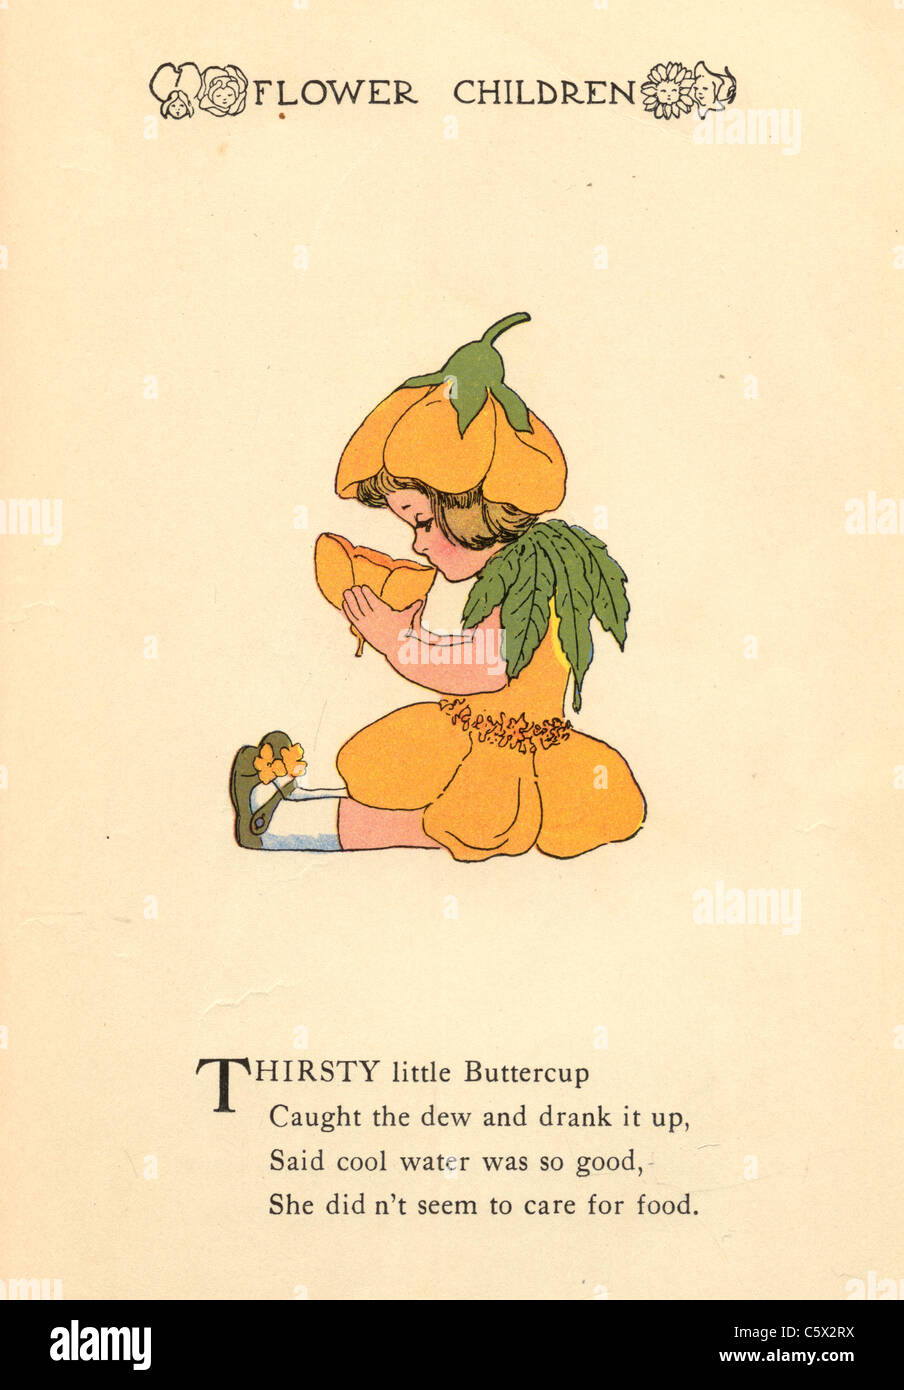 Buttercup - Flower Child Illustration from an antiquarian book Stock Photo